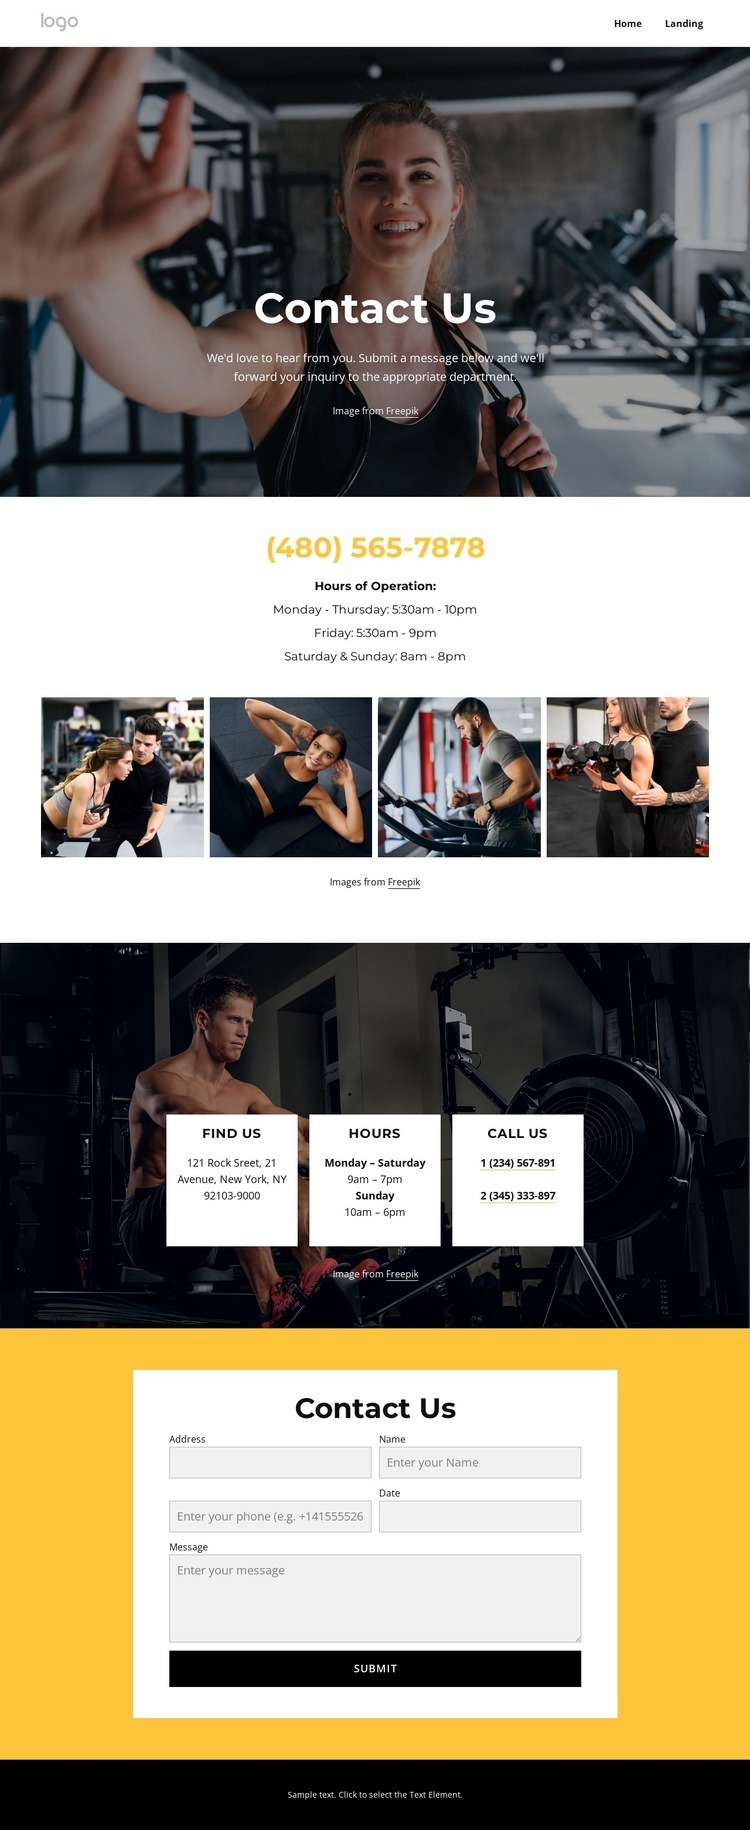 Personal training, group classes Squarespace Template Alternative